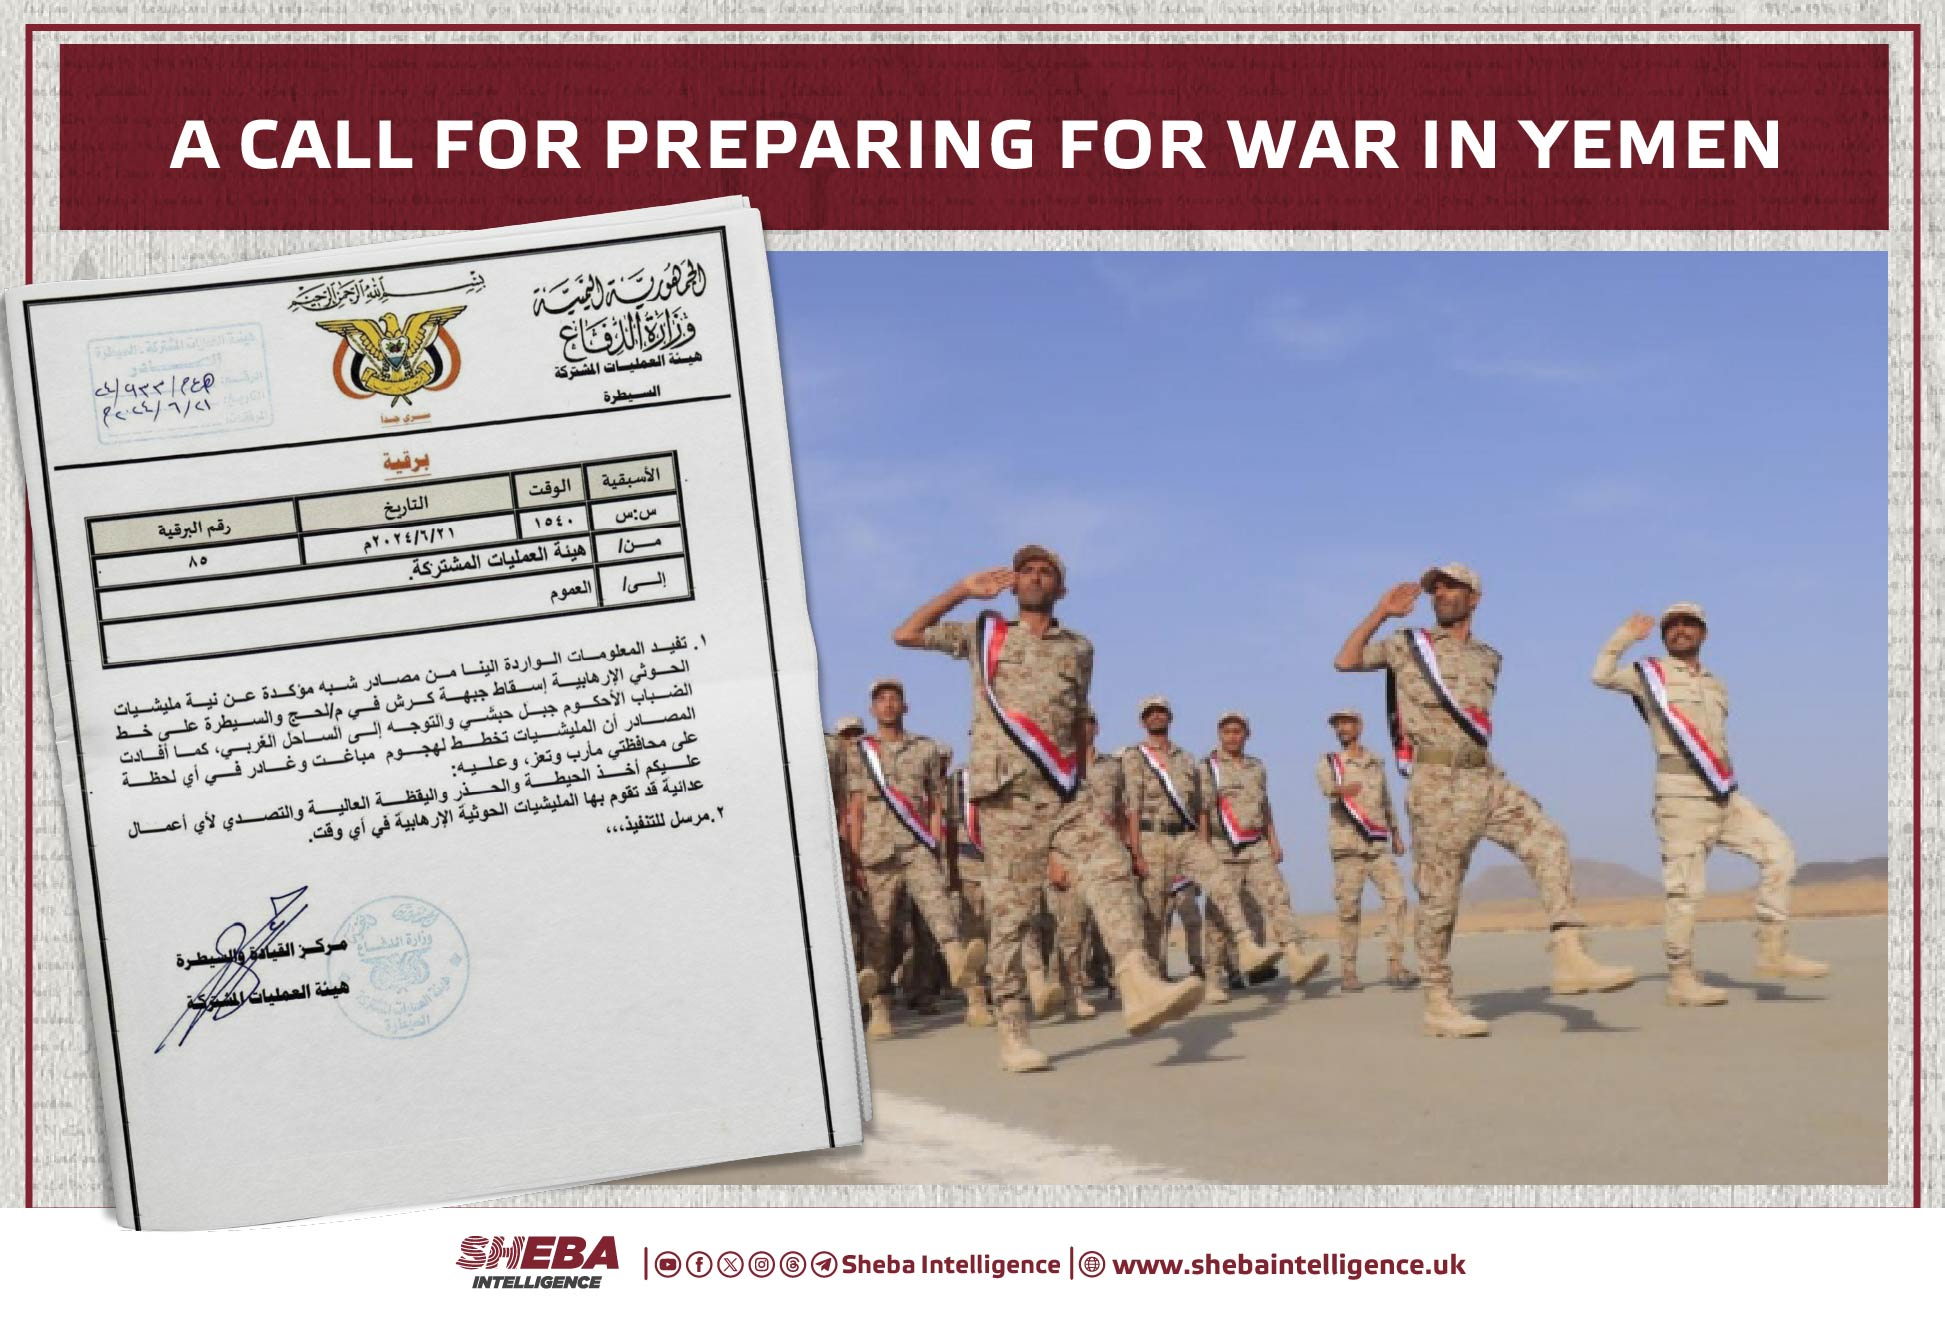 A Call for Preparing for War in Yemen